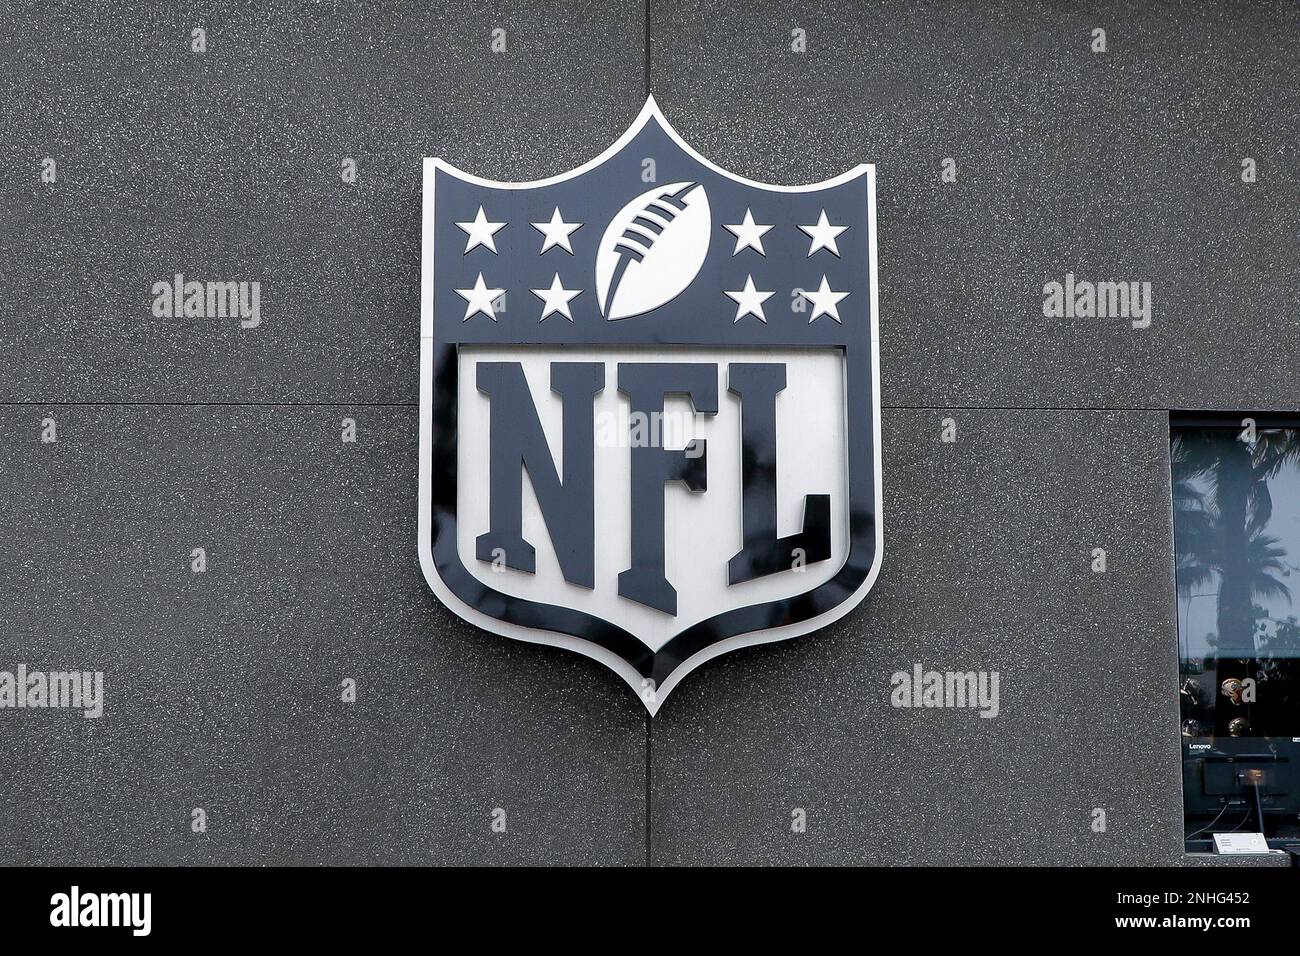 INGLEWOOD, CA - JANUARY 04: The NFL shield displayed on the NFL